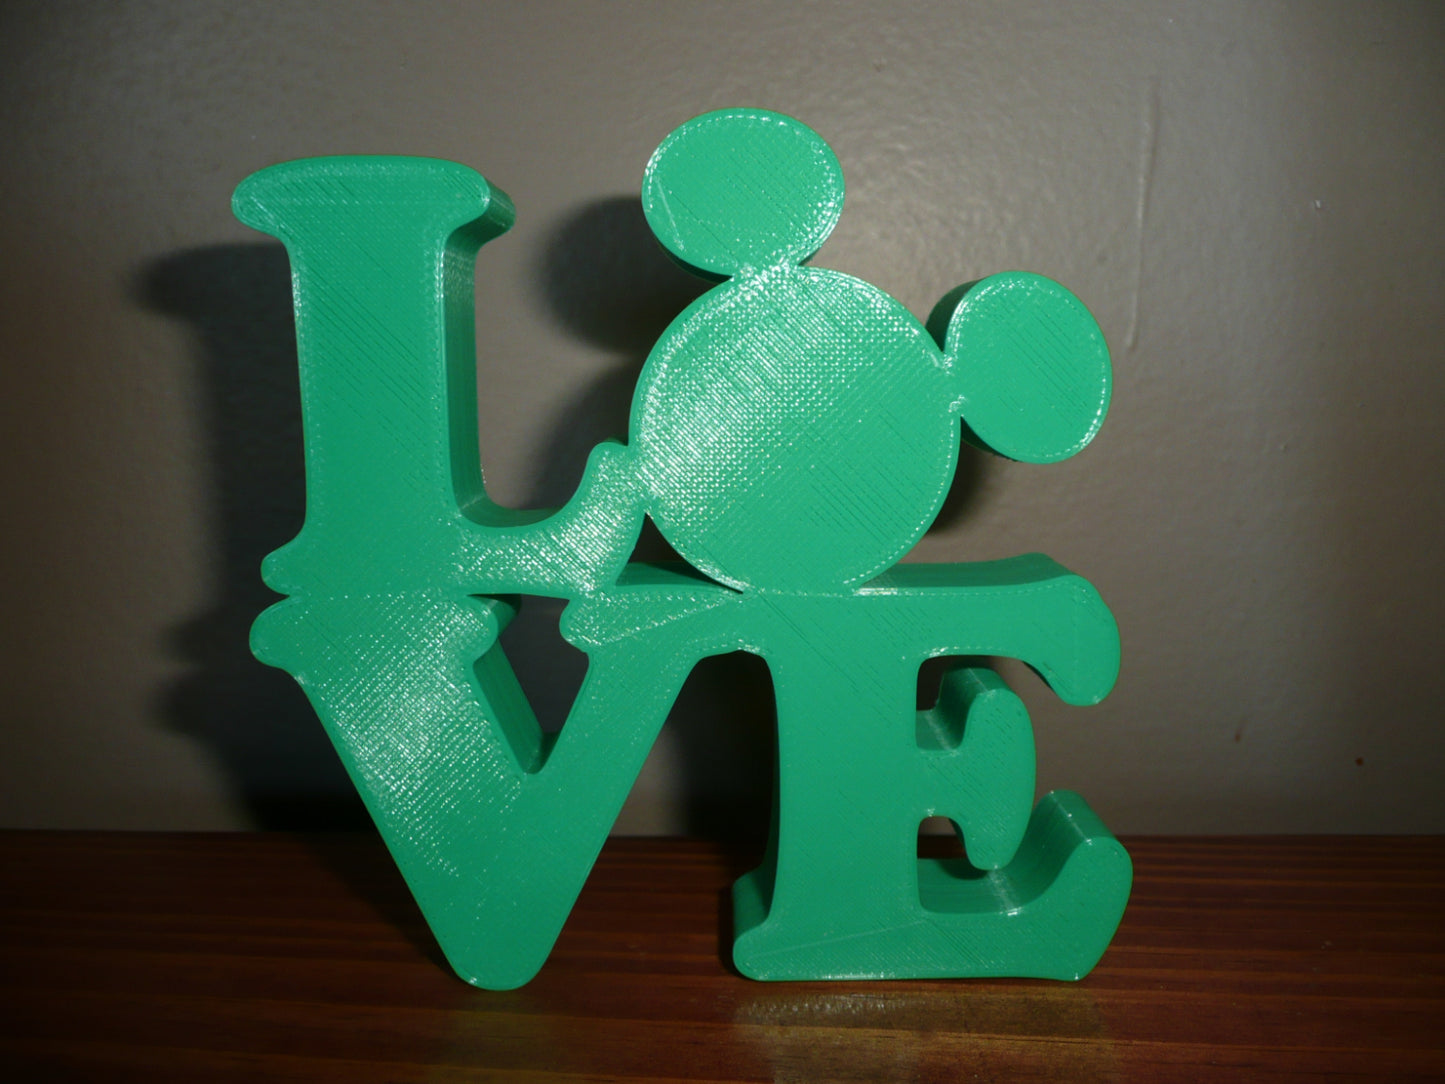 LOVE Word Quote With Mickey Mouse Face Head Green Made in USA PR4785